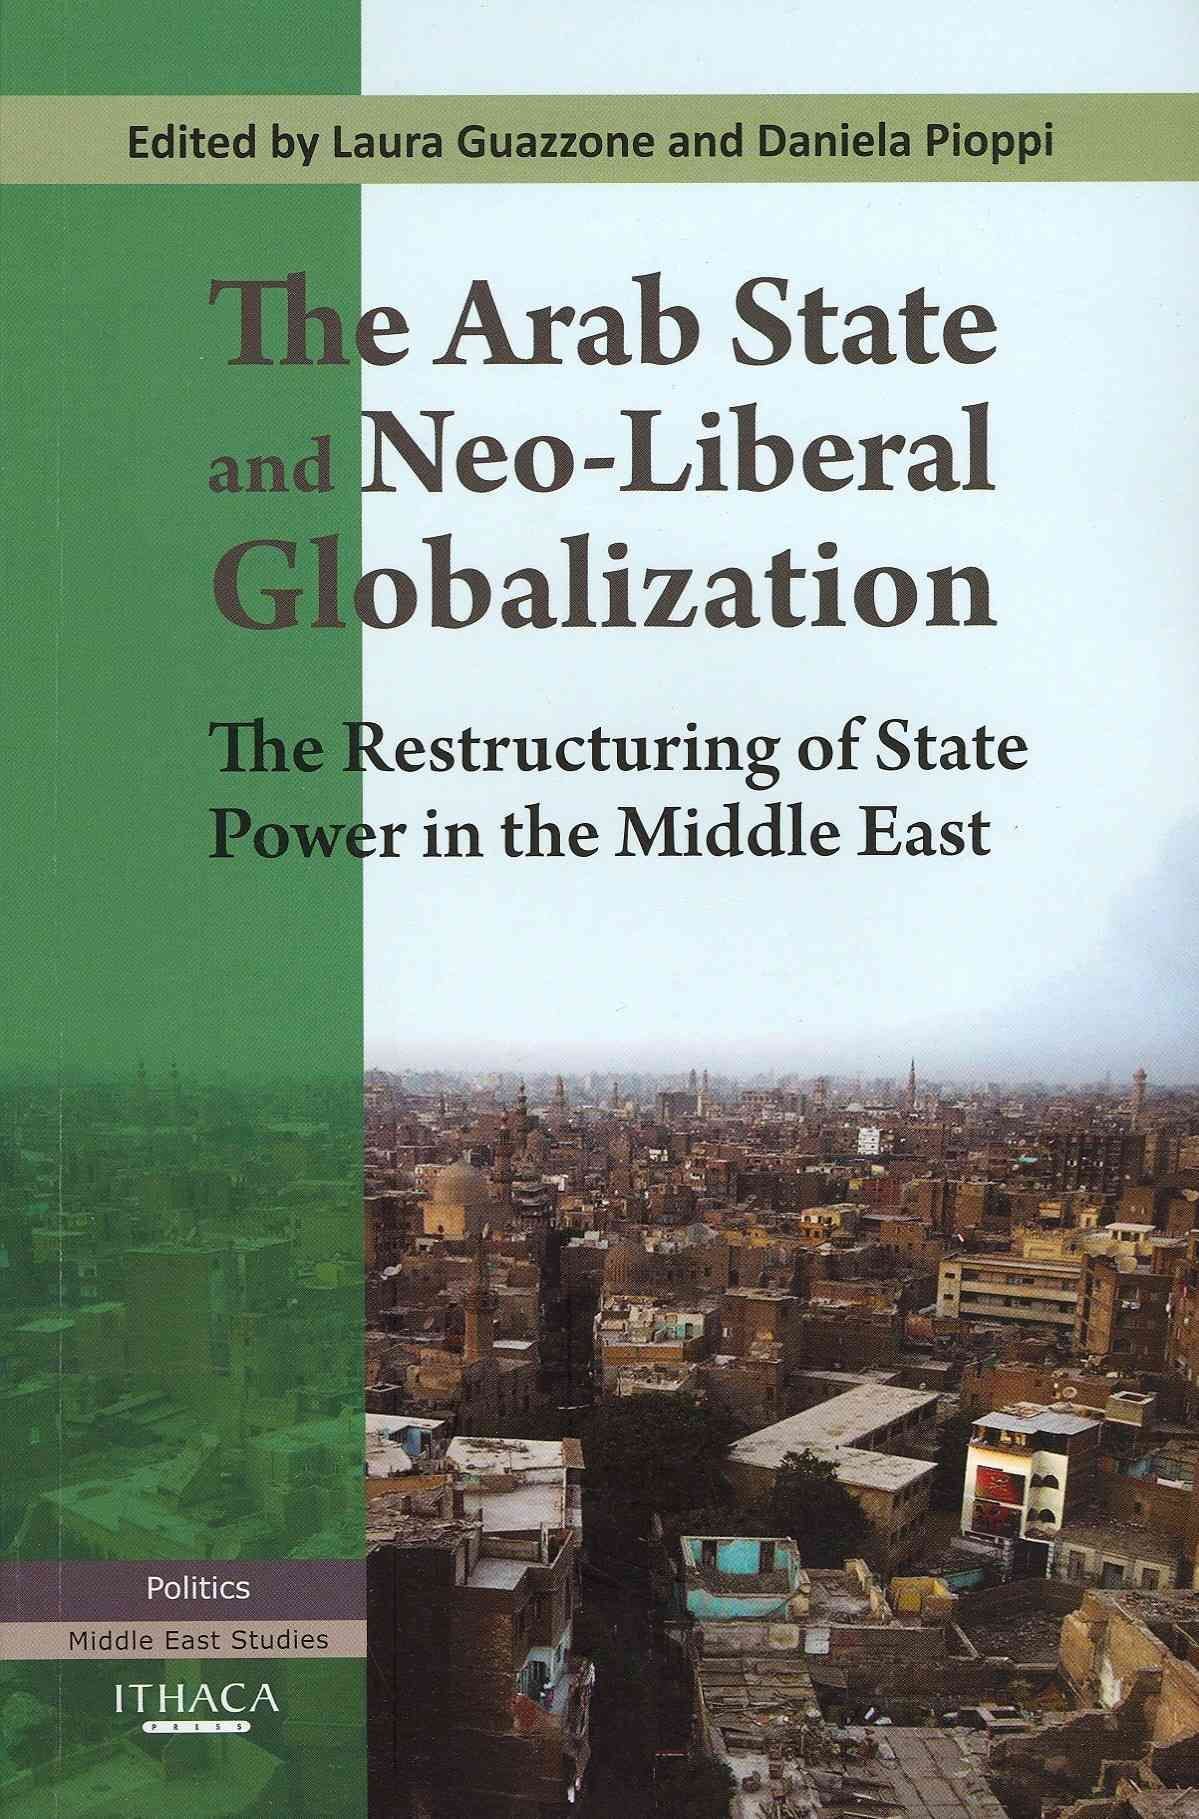 The Arab State and Neo-liberal Globalization